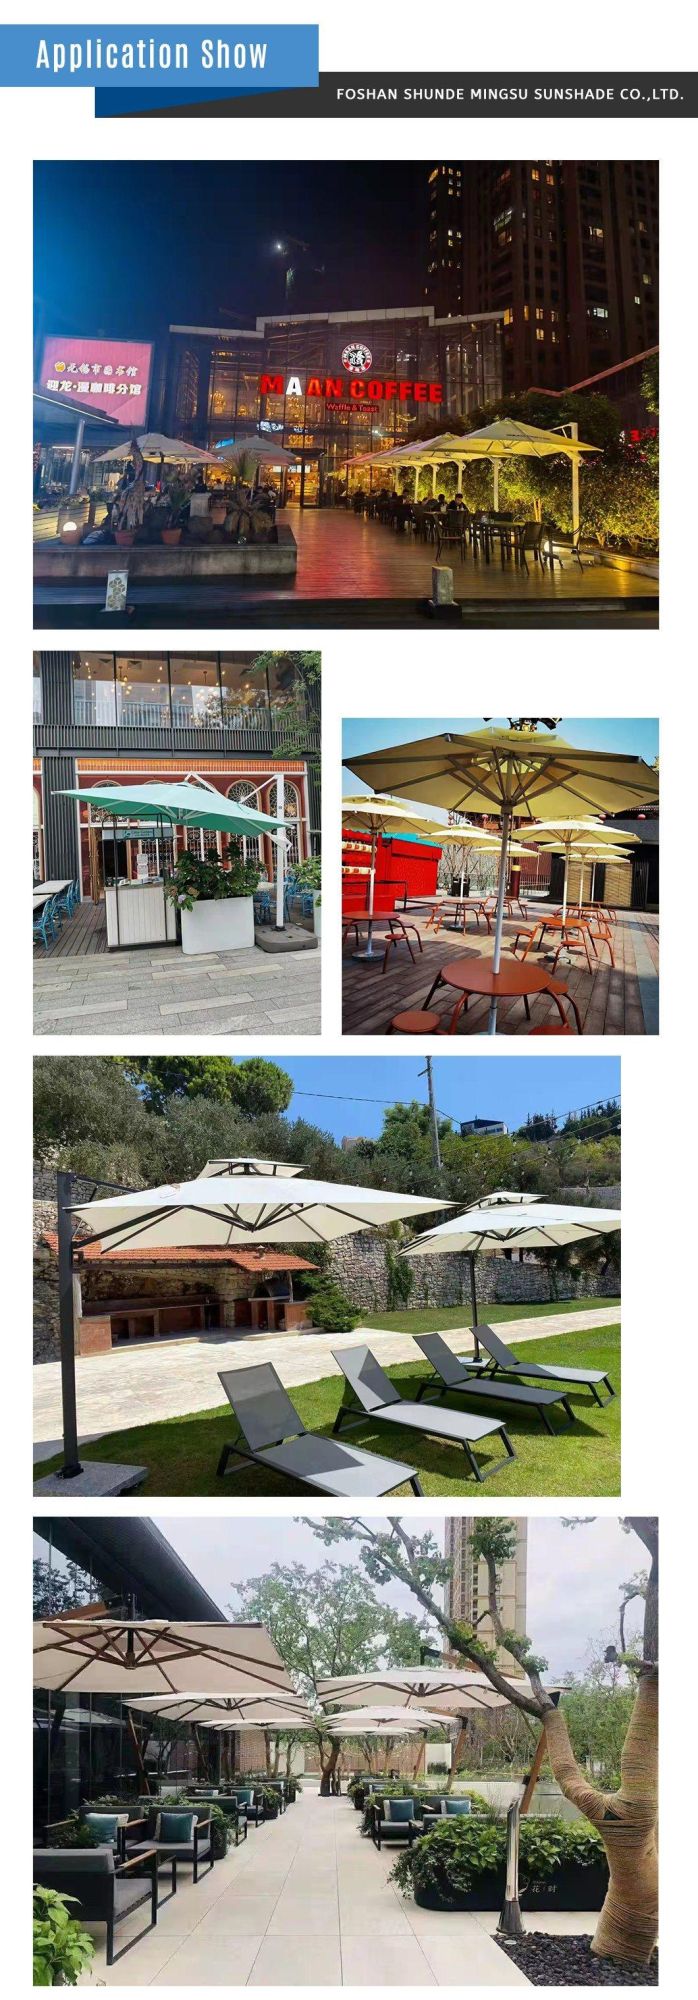 New Design Large This Folding Outdoor Sunshade Single Top Double Hydraulic Umbrella